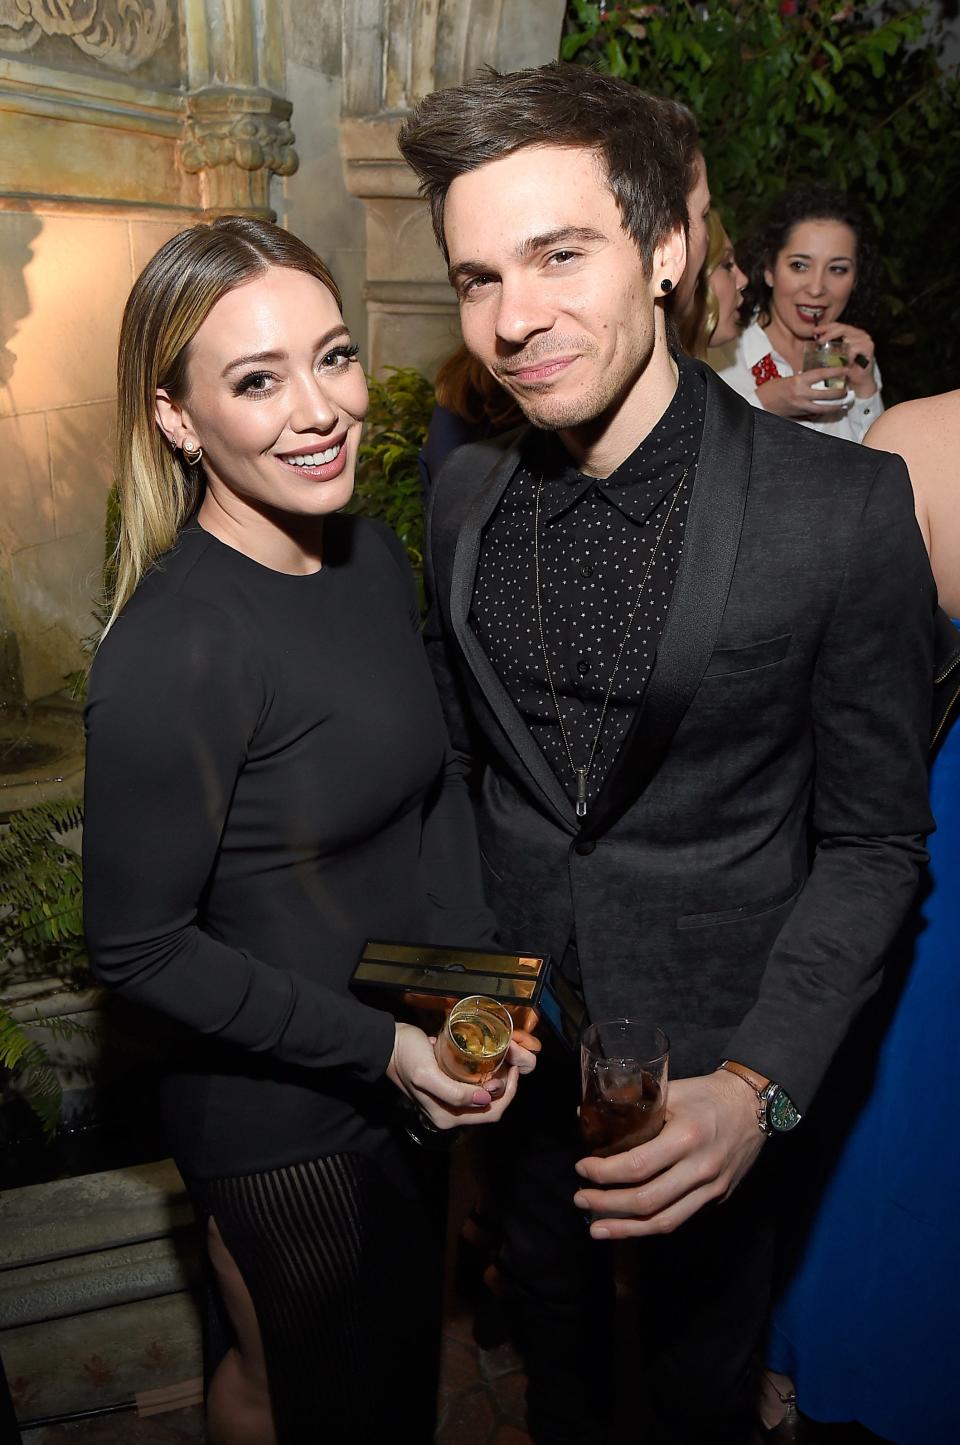 Hilary Duff and her husband Matthew Koma have welcomed their second child together, Mae James Bair.